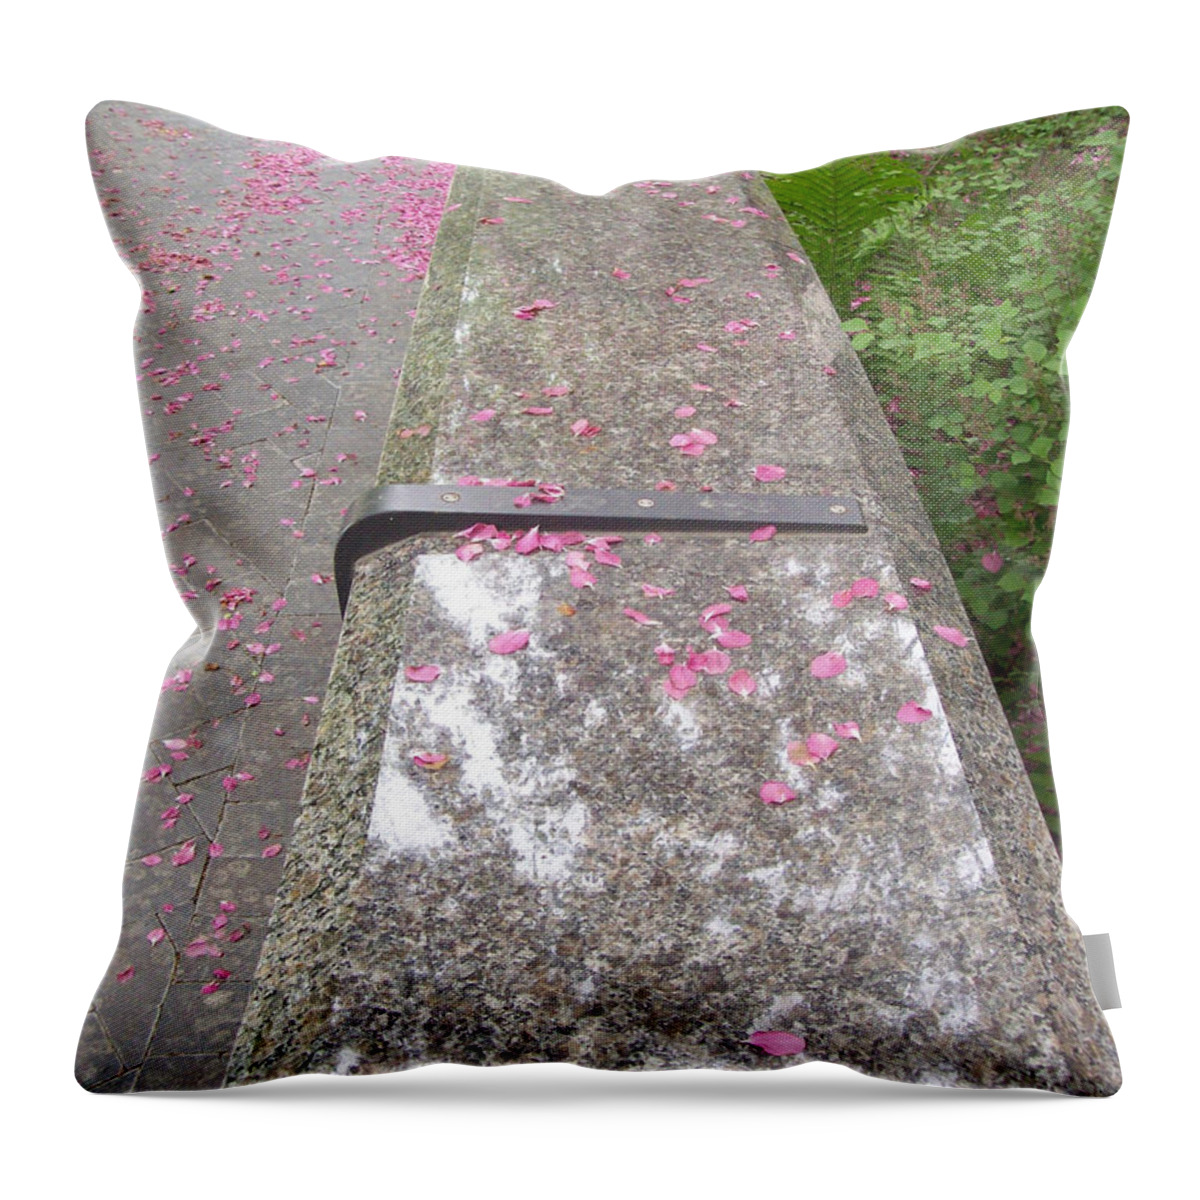 Bench Throw Pillow featuring the photograph Please Be Seated by Mary Mikawoz